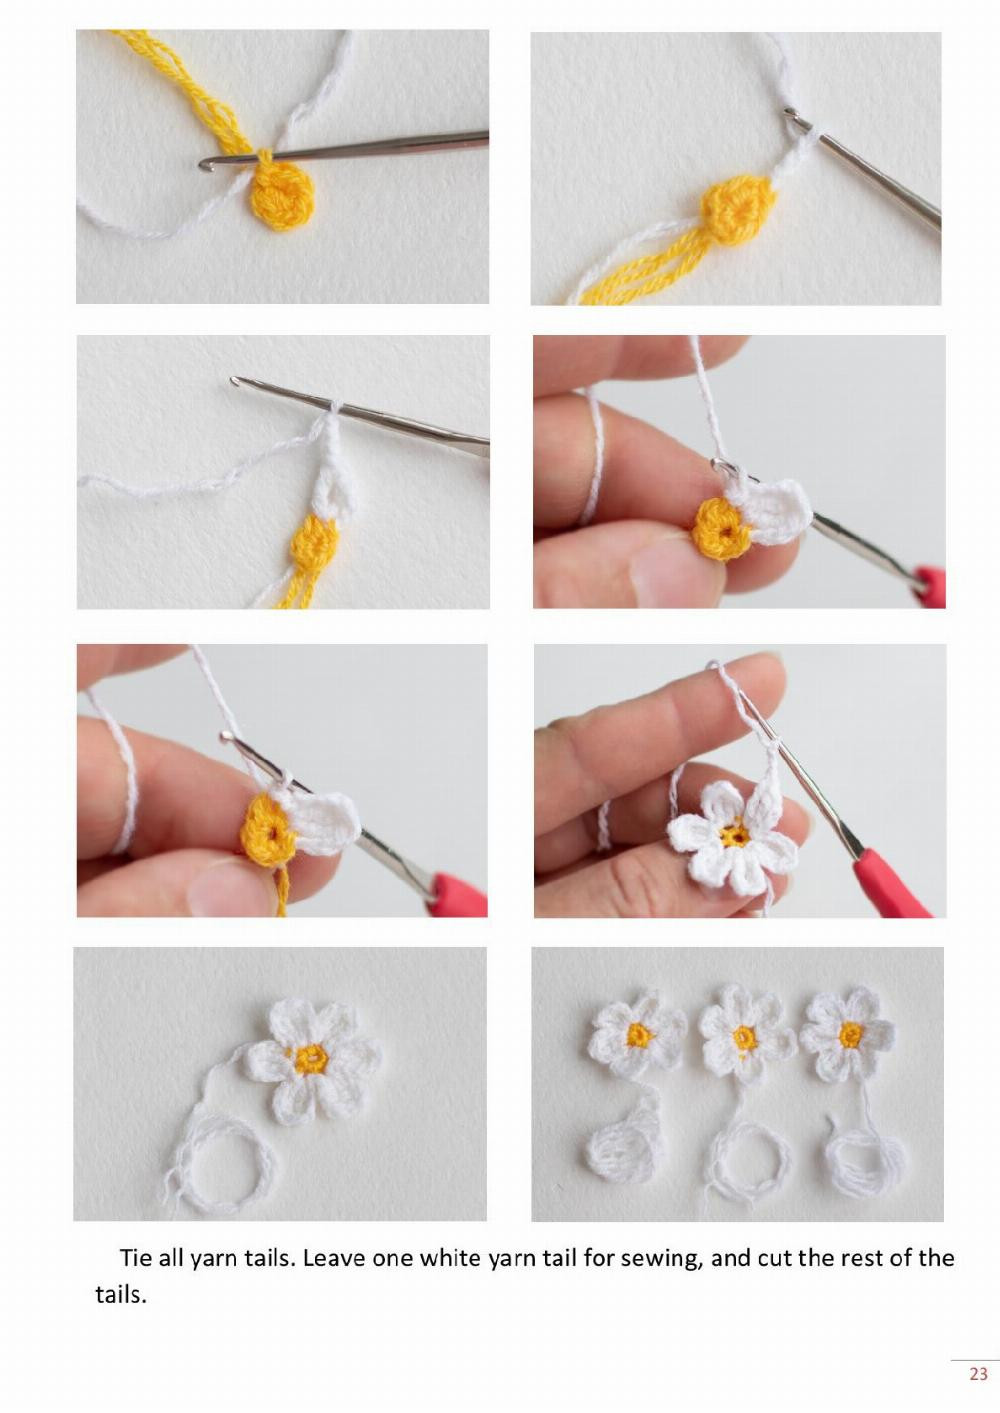 dandelions in a mug and a watering can crochet pattern